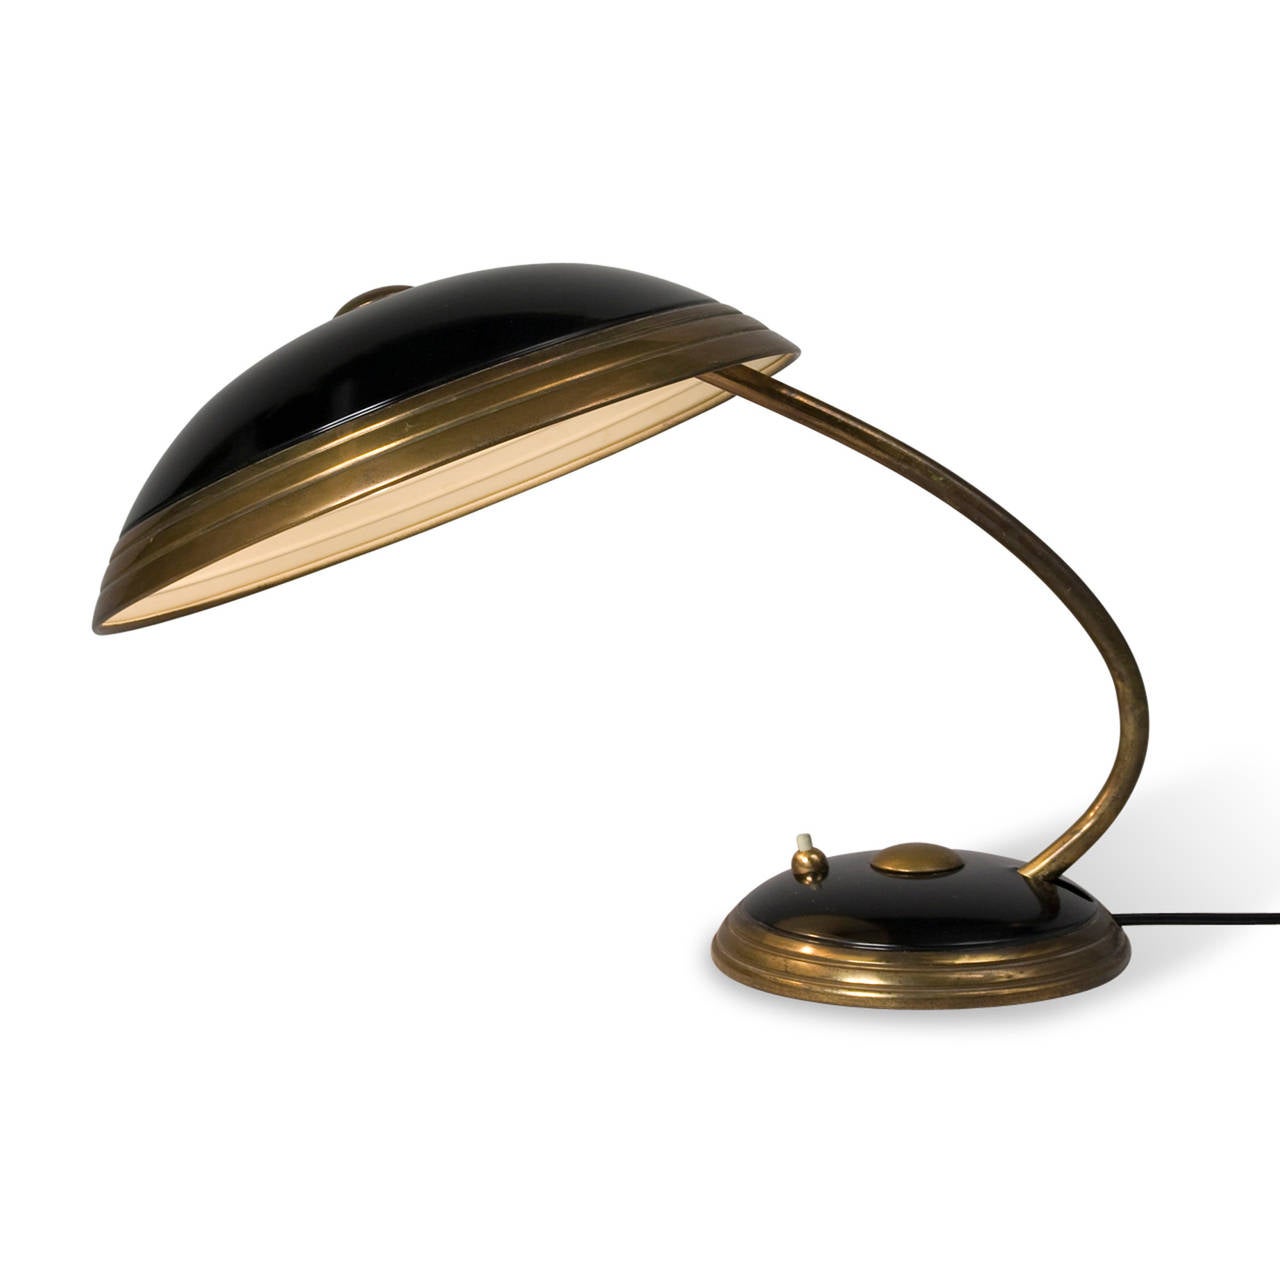 Patinated brass and black lacquered metal dome desk lamp, the shade as well as the arm pivoting up and down, By Helo, German 1950s. Height 14 in, diameter of shade 12 1/4 in.